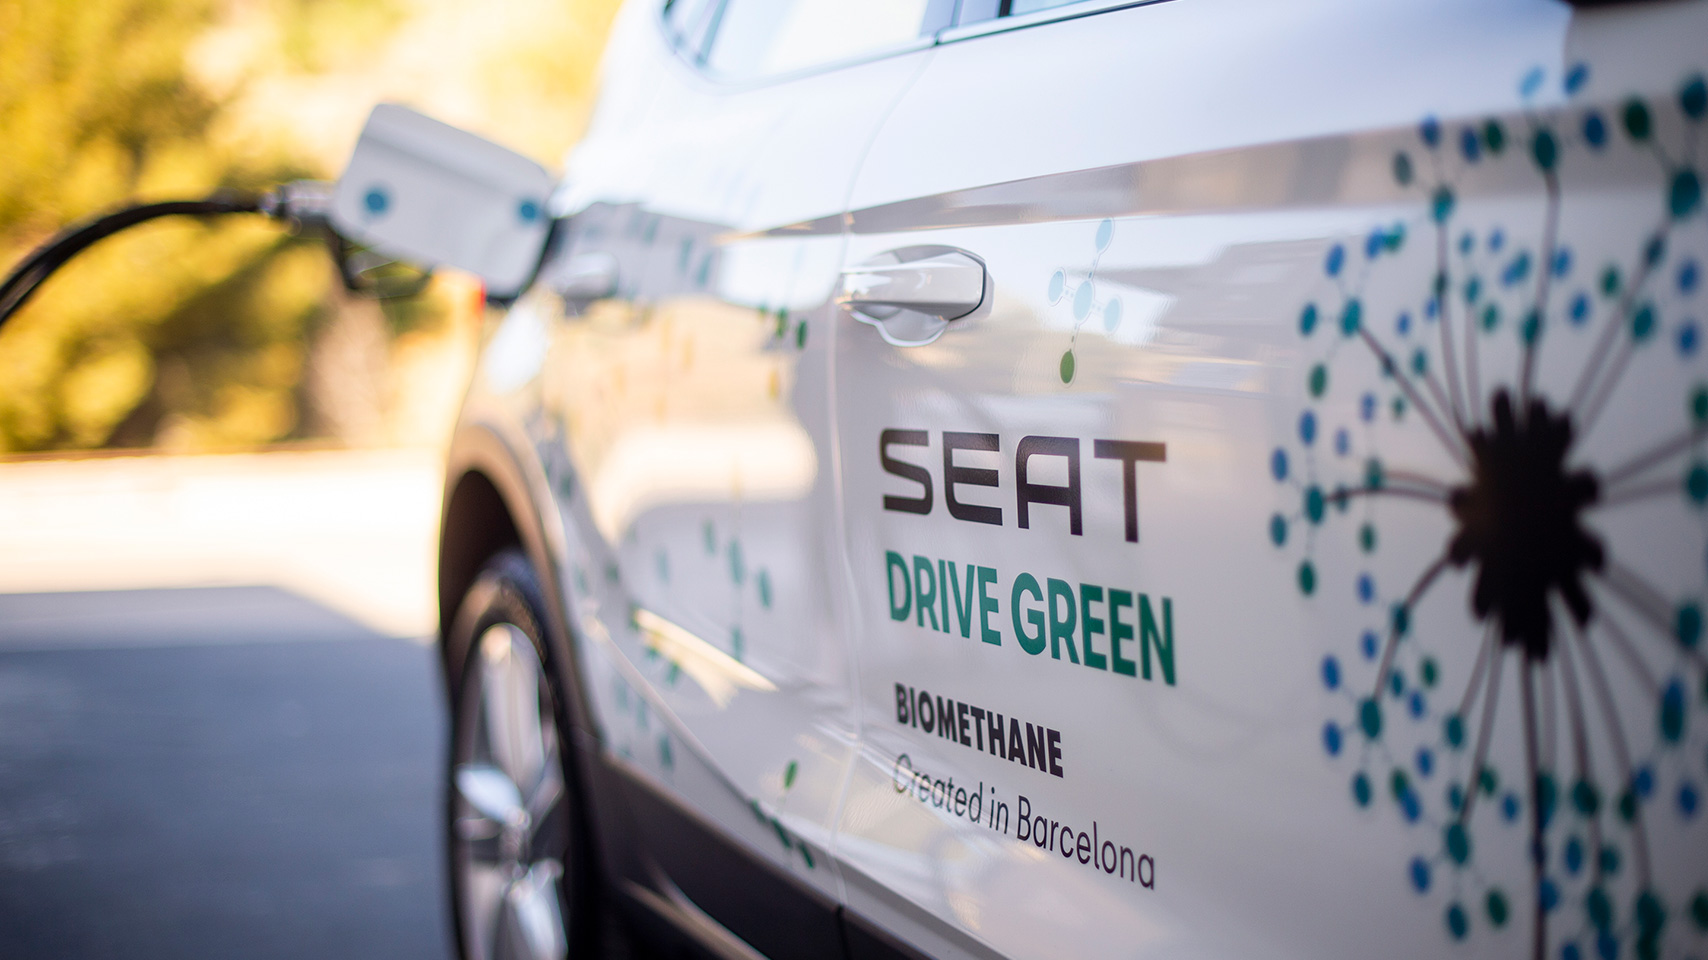 SEAT Arona powered by biomethane at Ecoparc 2